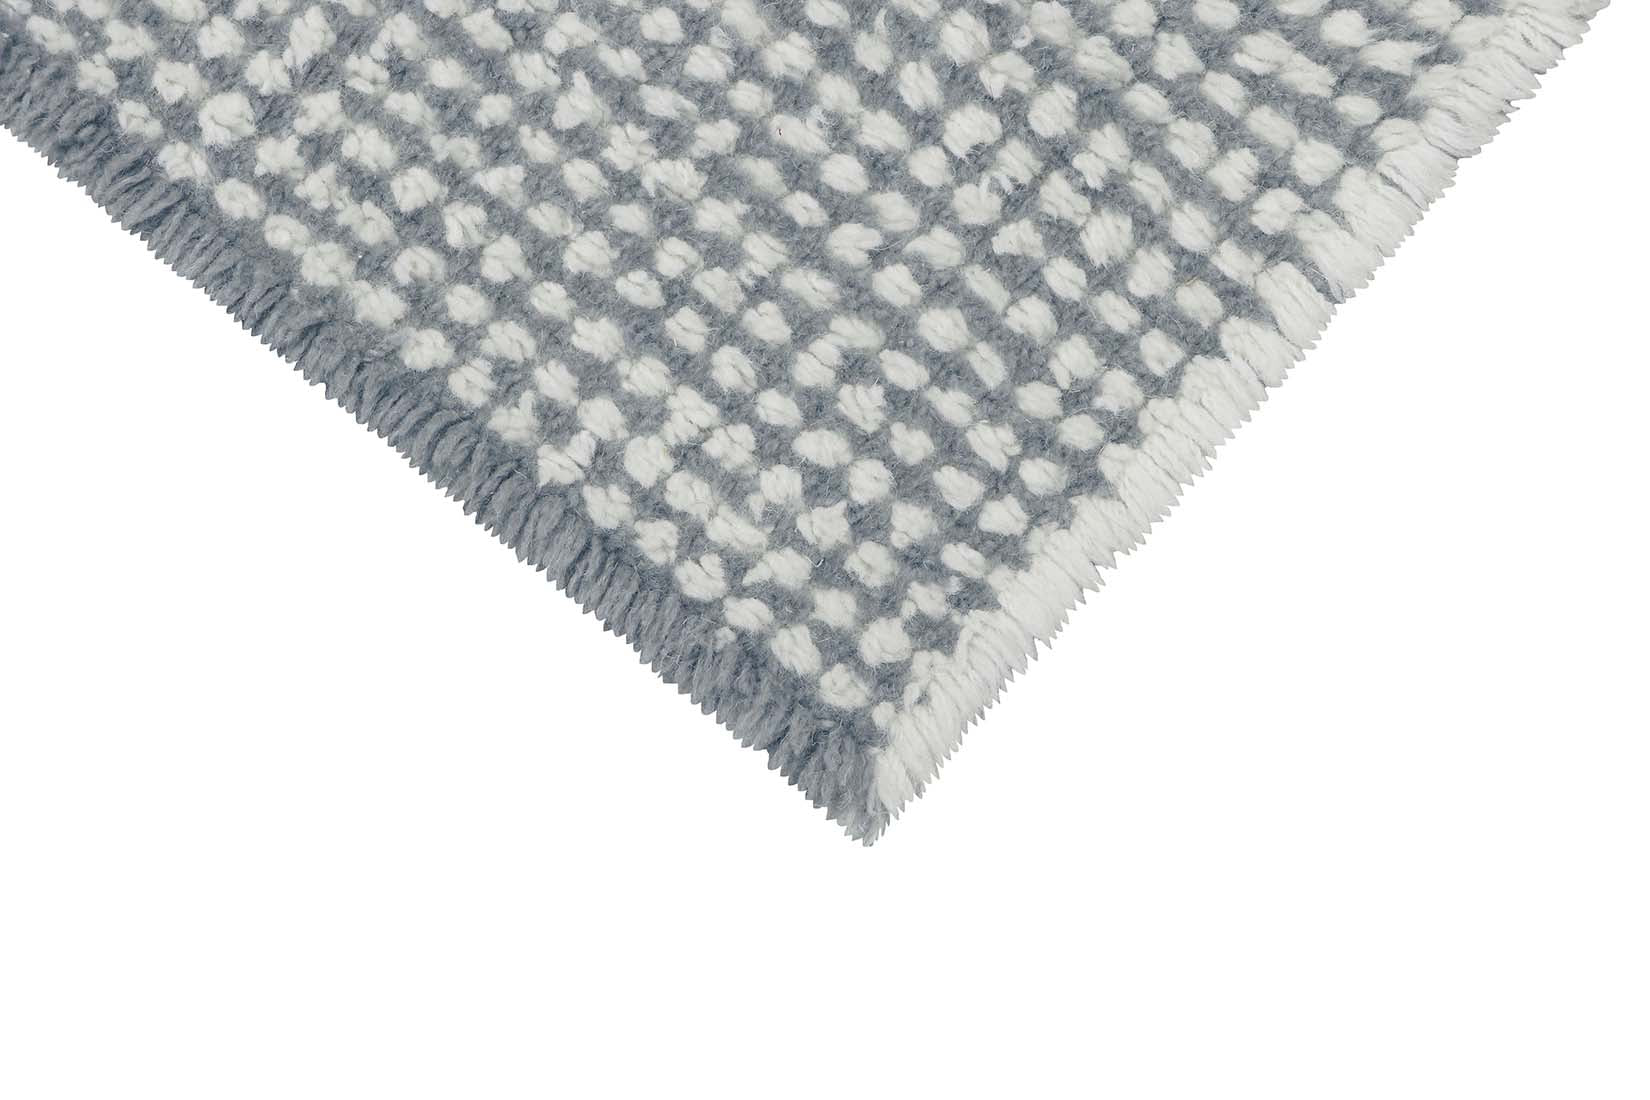 blue and cream washable wool rug
